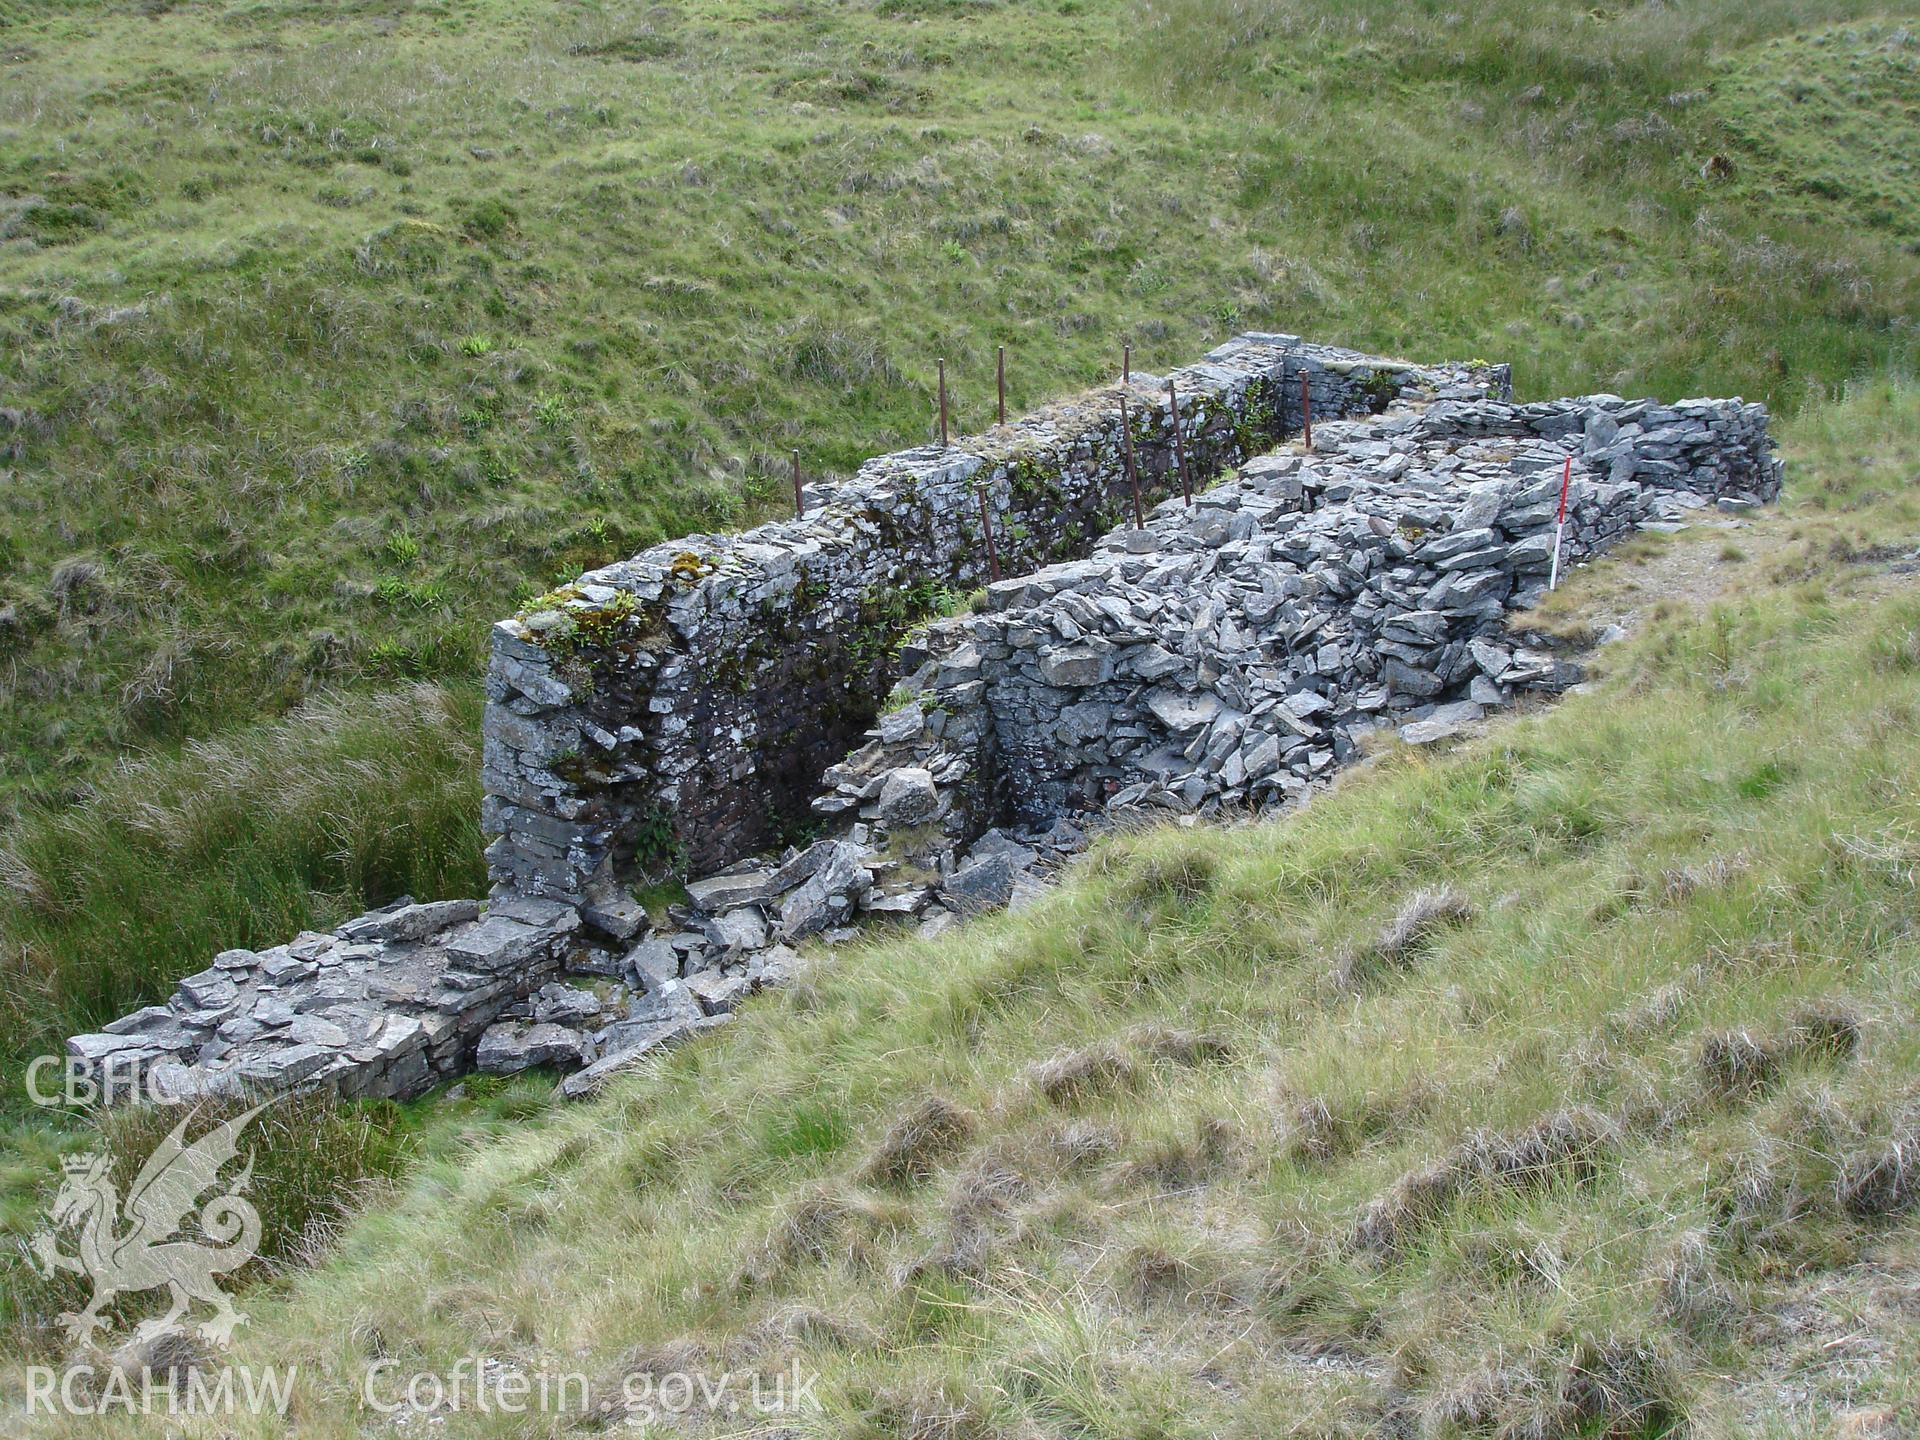 Digital colour photograph of Cafartha wheel pit II taken on 11/07/2006 by R.P. Sambrook during the Plynlimon Glaslyn South Upland survey undertaken by Trysor.